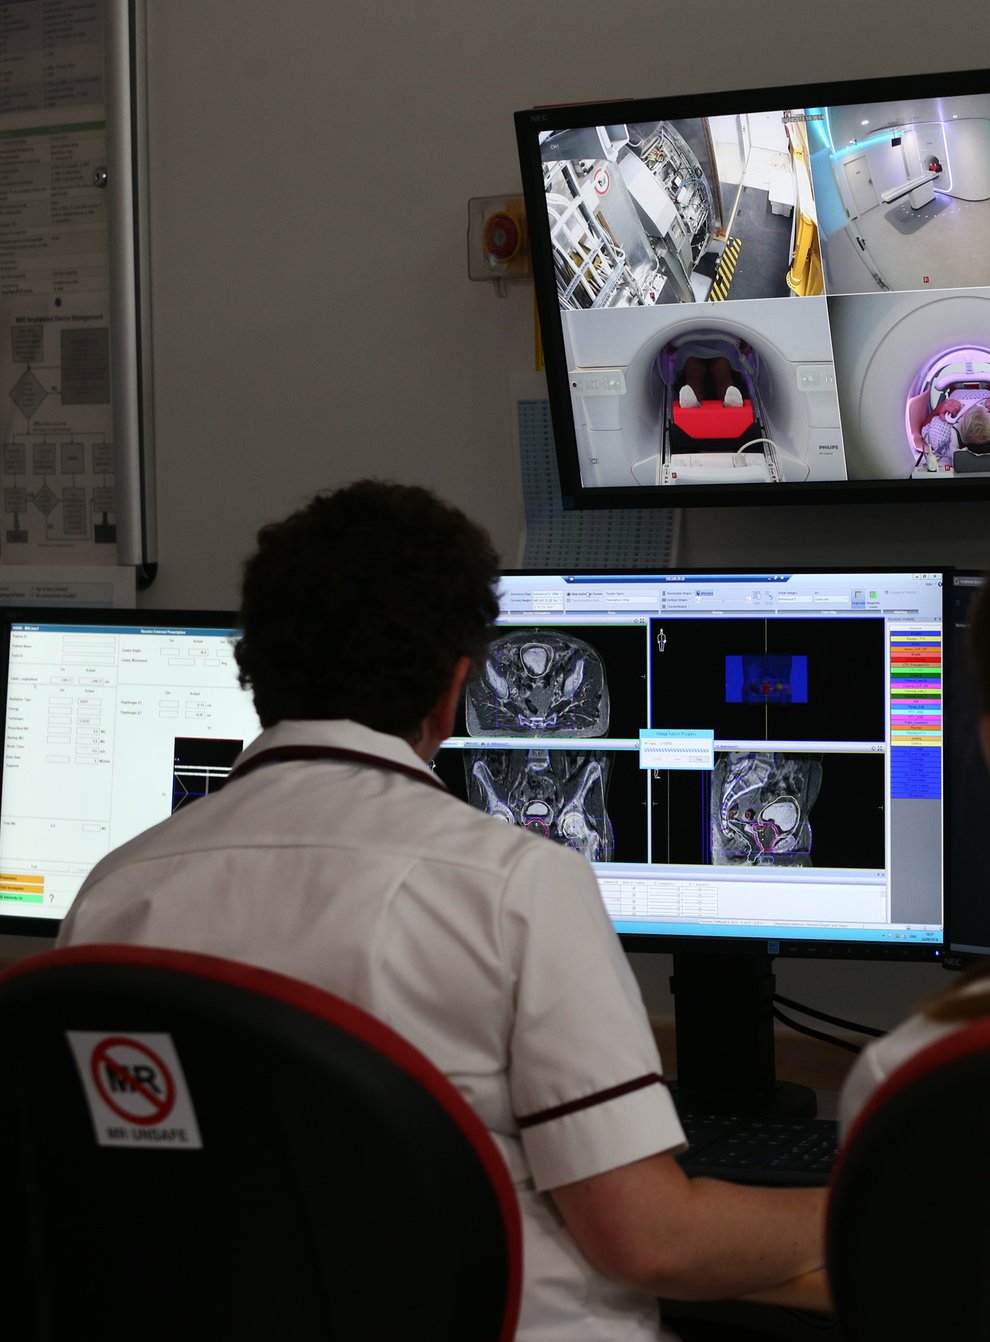 Staff monitor a patient's cancer treatment at the Royal Marsden Hospital in Surrey